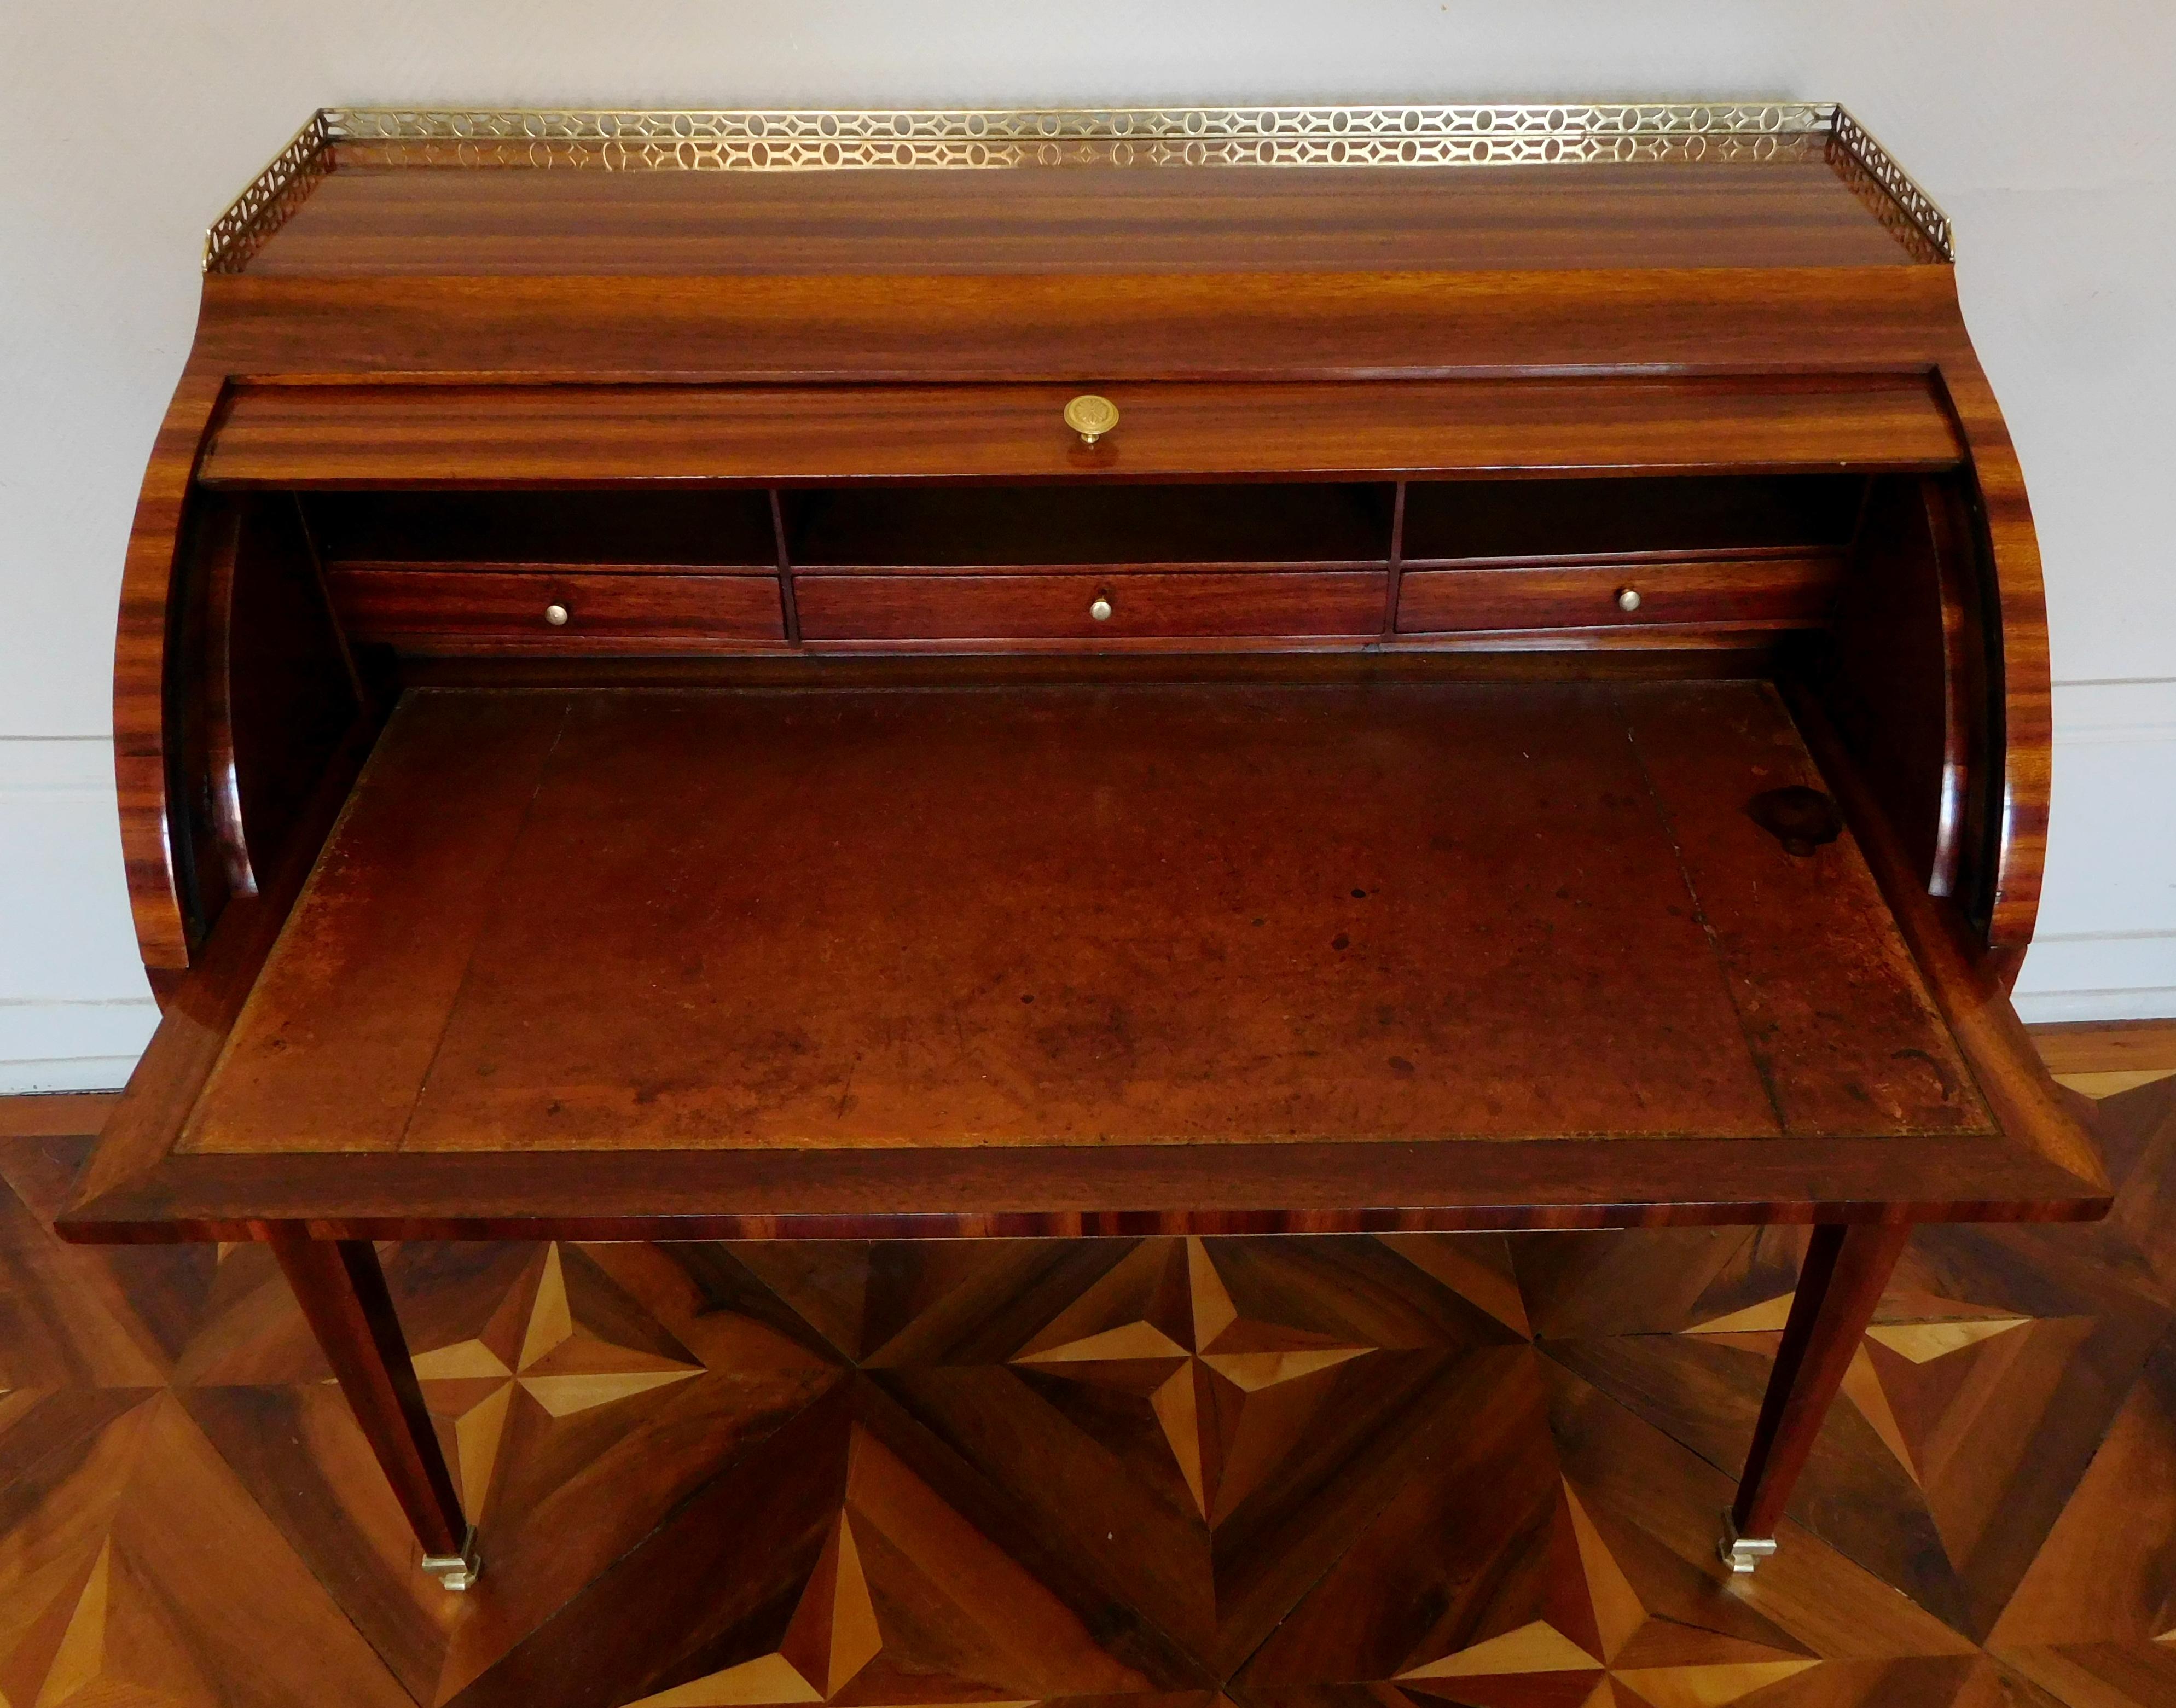 Louis XVI Satinwood Roll Top Desk by Macret - Stamped - 18th Century circa 1780 For Sale 8